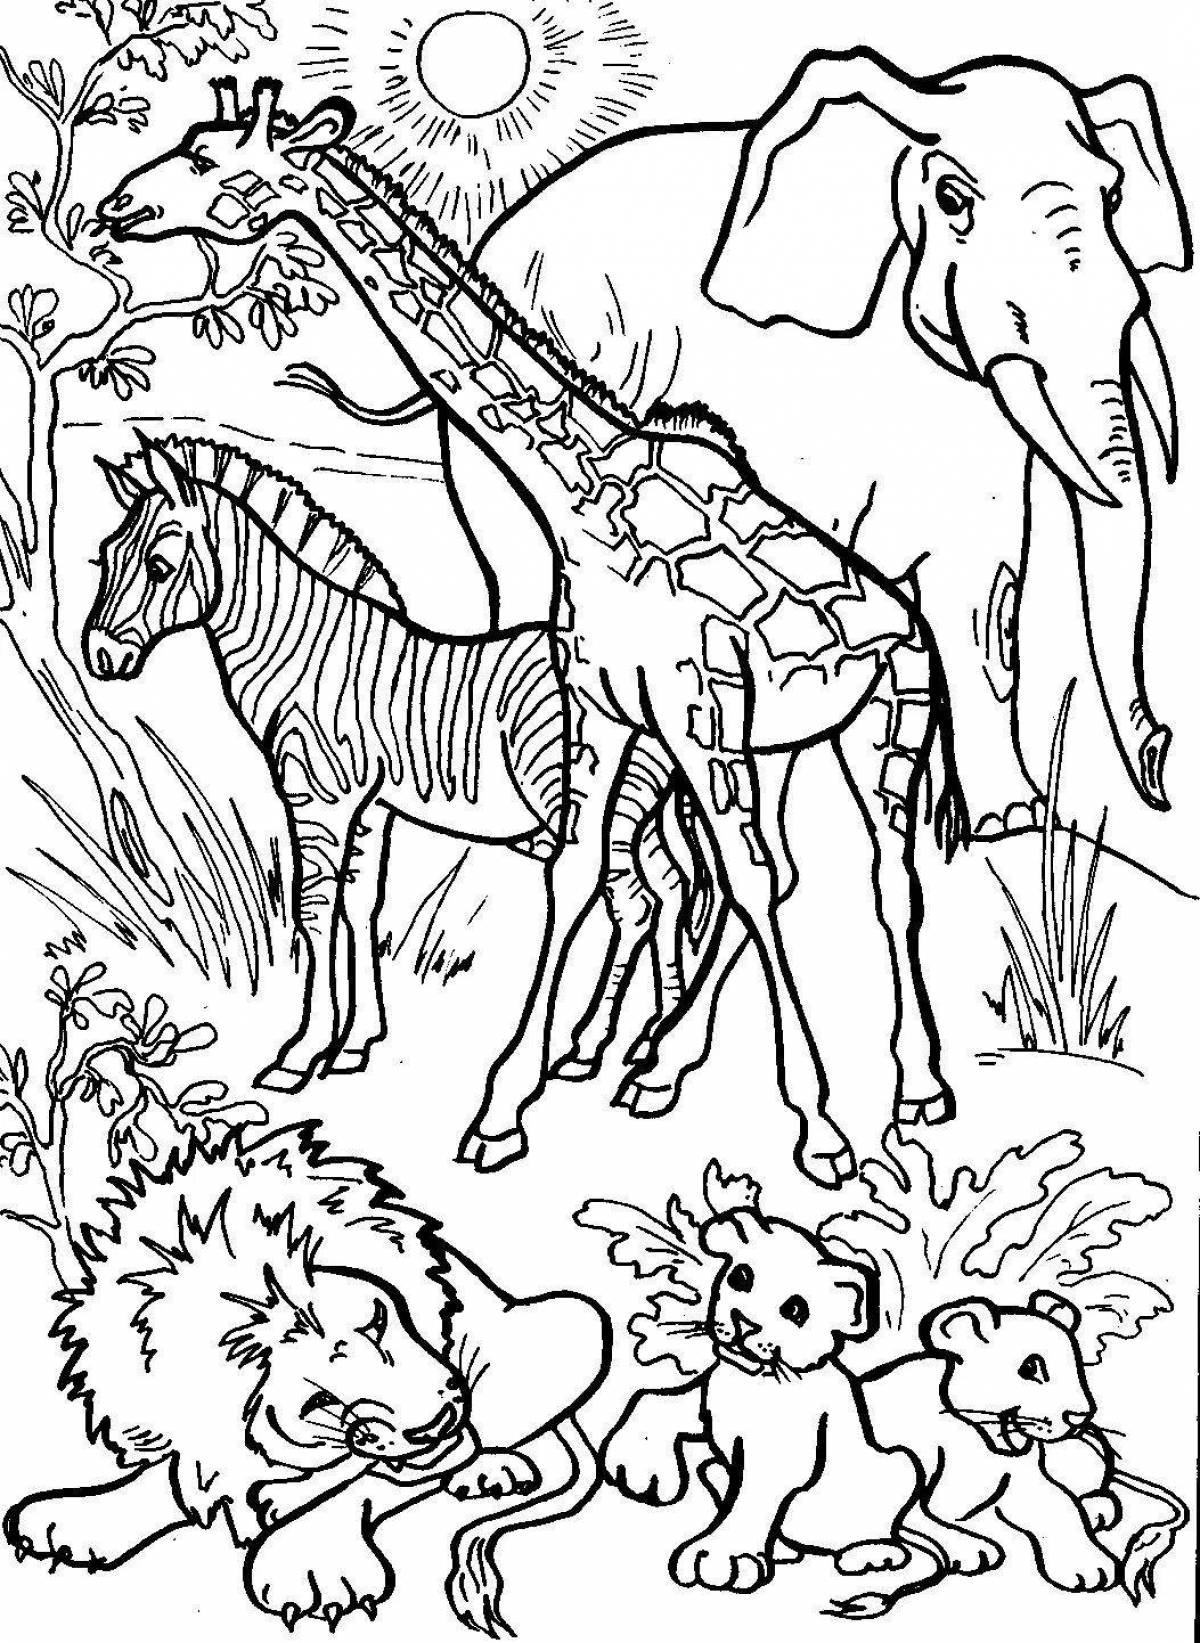 Attractive hot country animals coloring book for 4 year olds